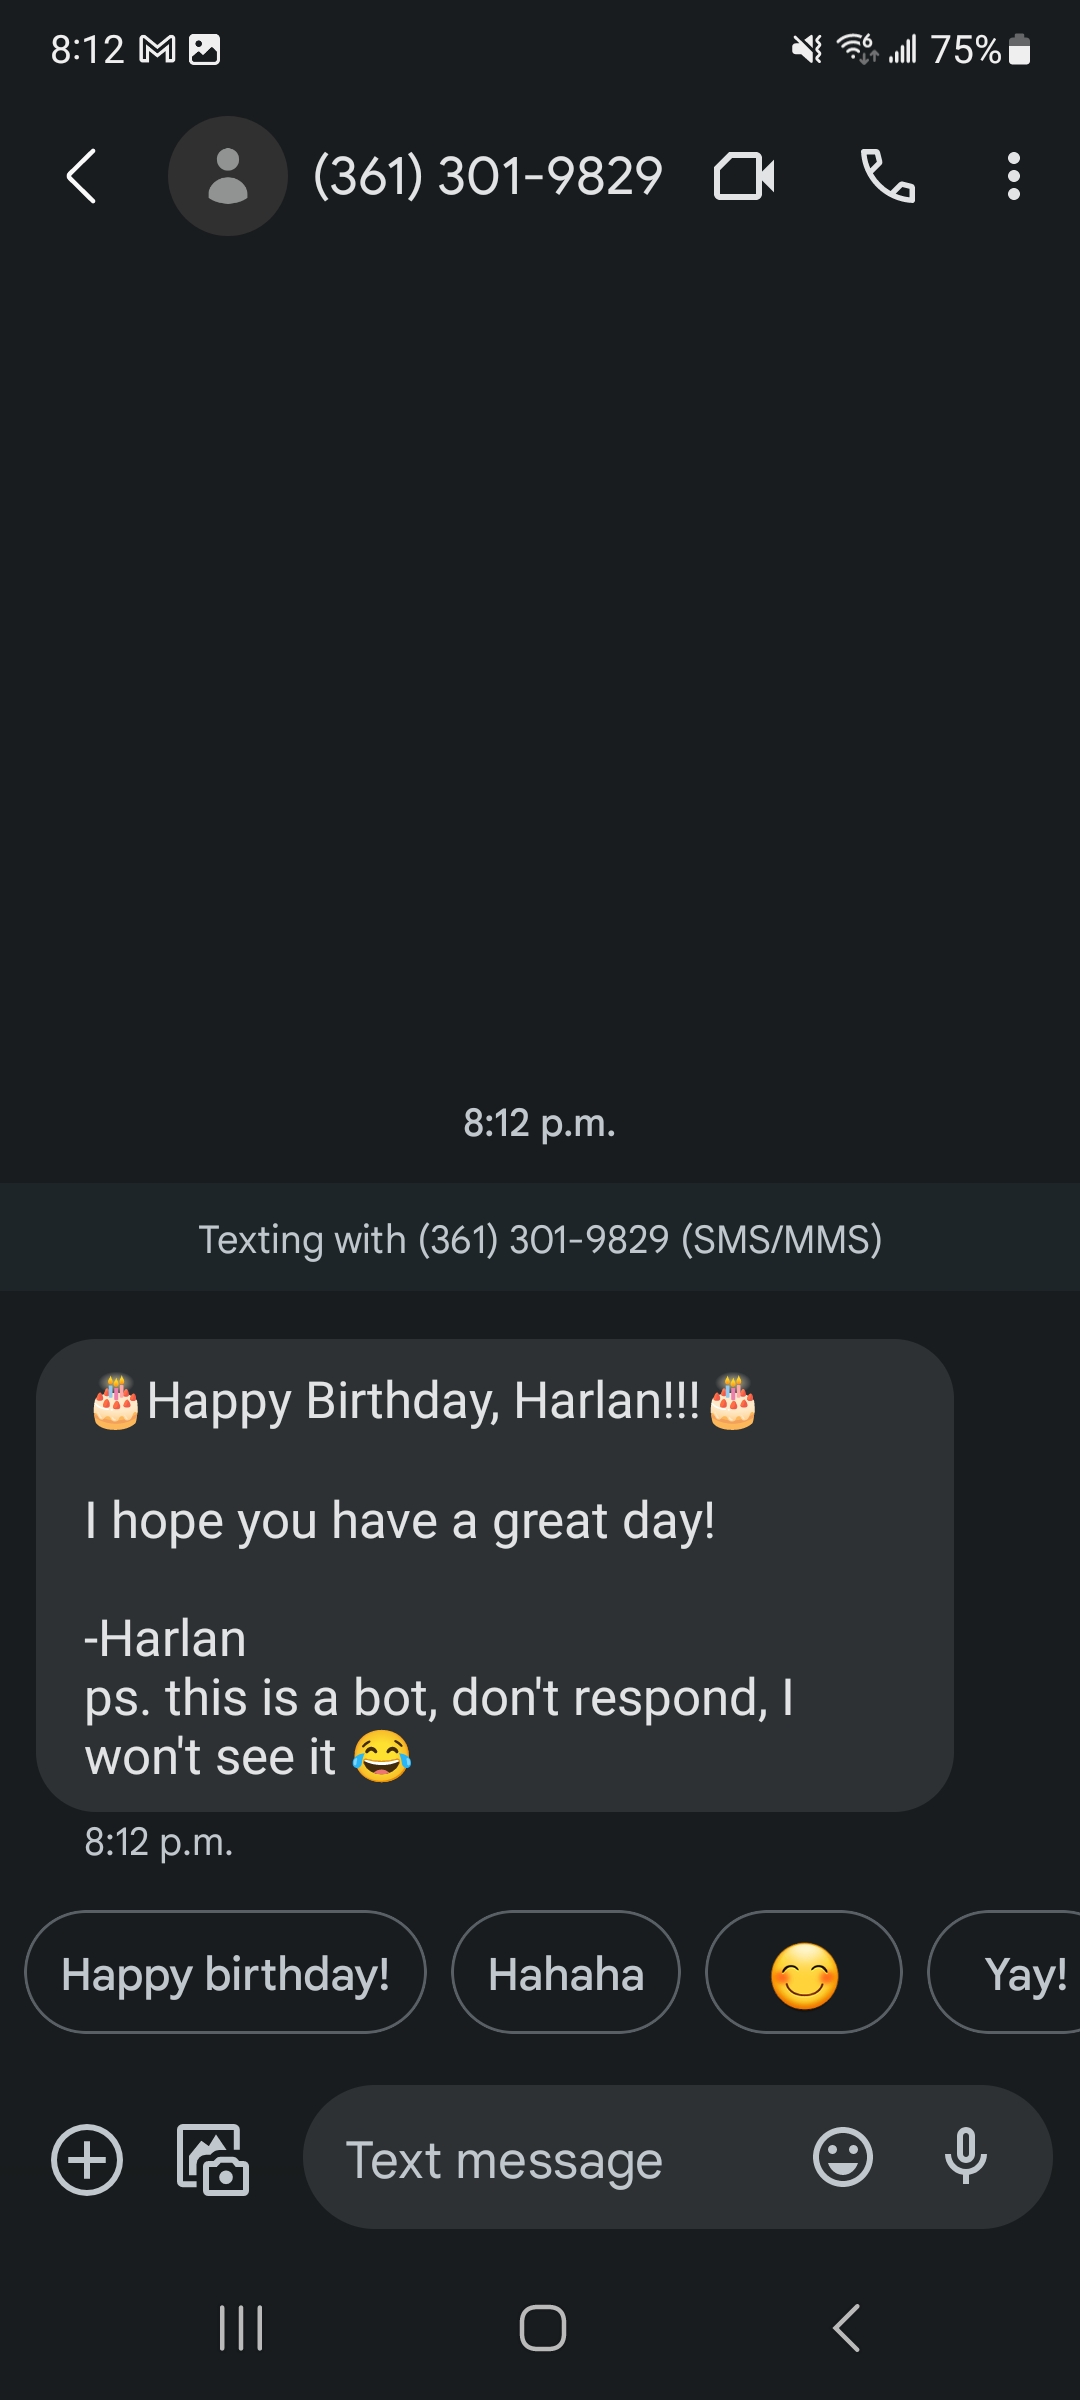 Screenshot of the bot texting happy birthday to the recipient